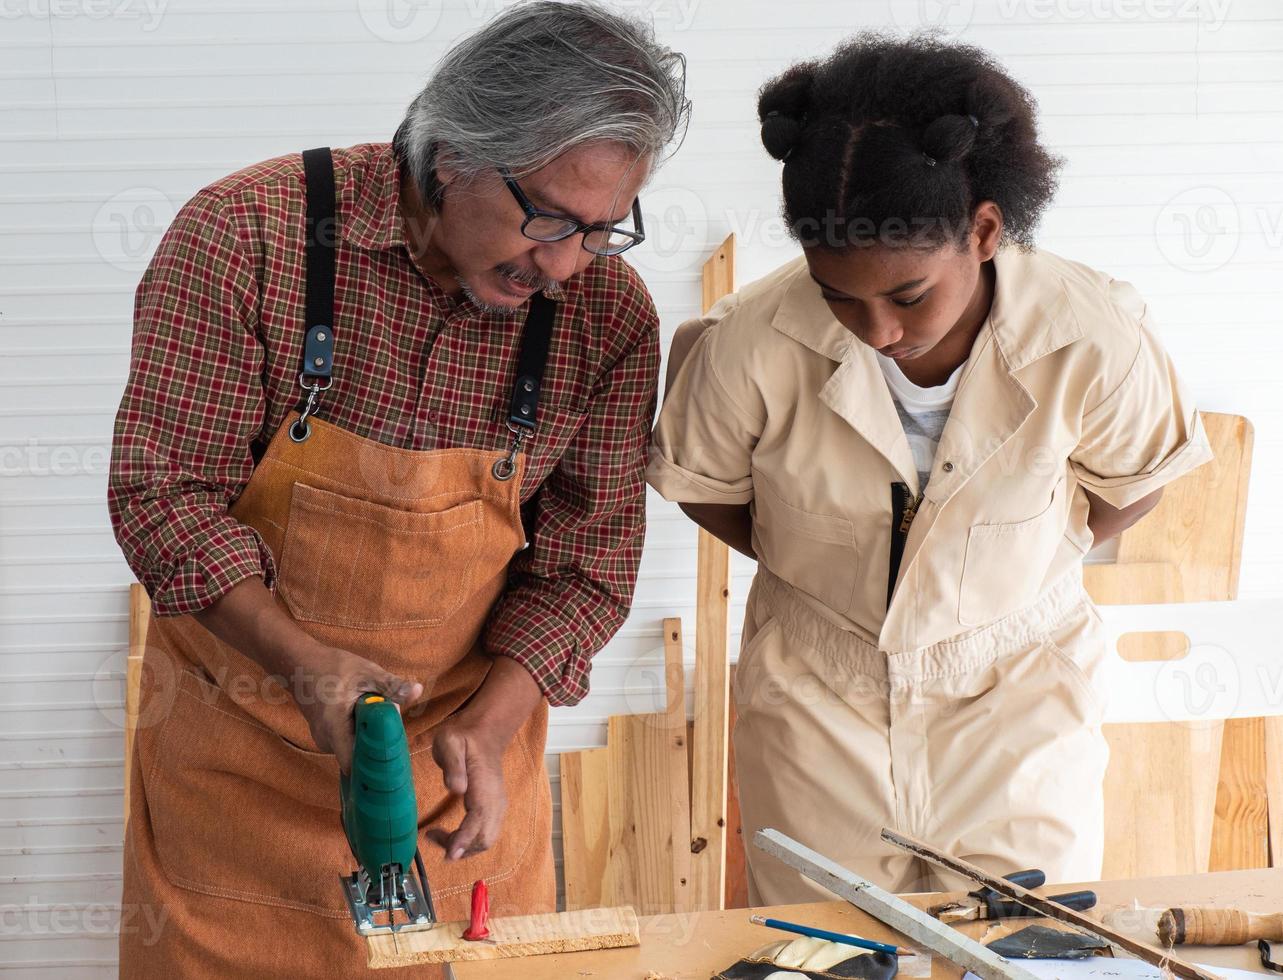 Teenaged girls learn to use an electronic saw and play with their grandfather in the wooden workshop, a concept for enhancing the development and thinking of children. photo